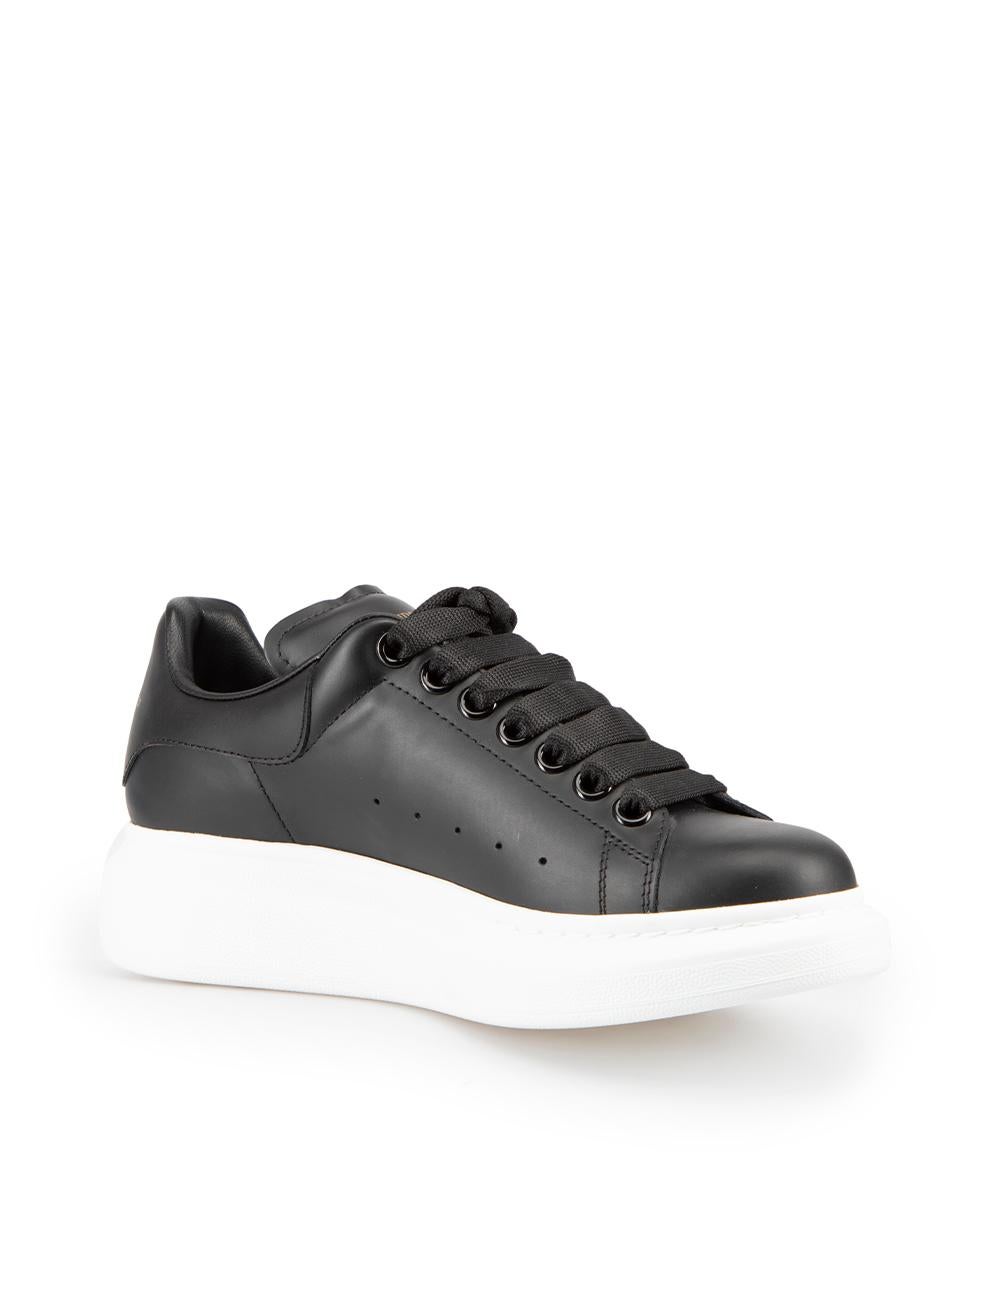 CONDITION is Never Worn. No visible wear to trainers is evident on this used Alexander McQueen designer resale item.
  
Details
Black
Leather
Oversized model
Low top trainers
Lace up closure
Round toe
Platform heel
Rubber sole
Branded logo on back
 